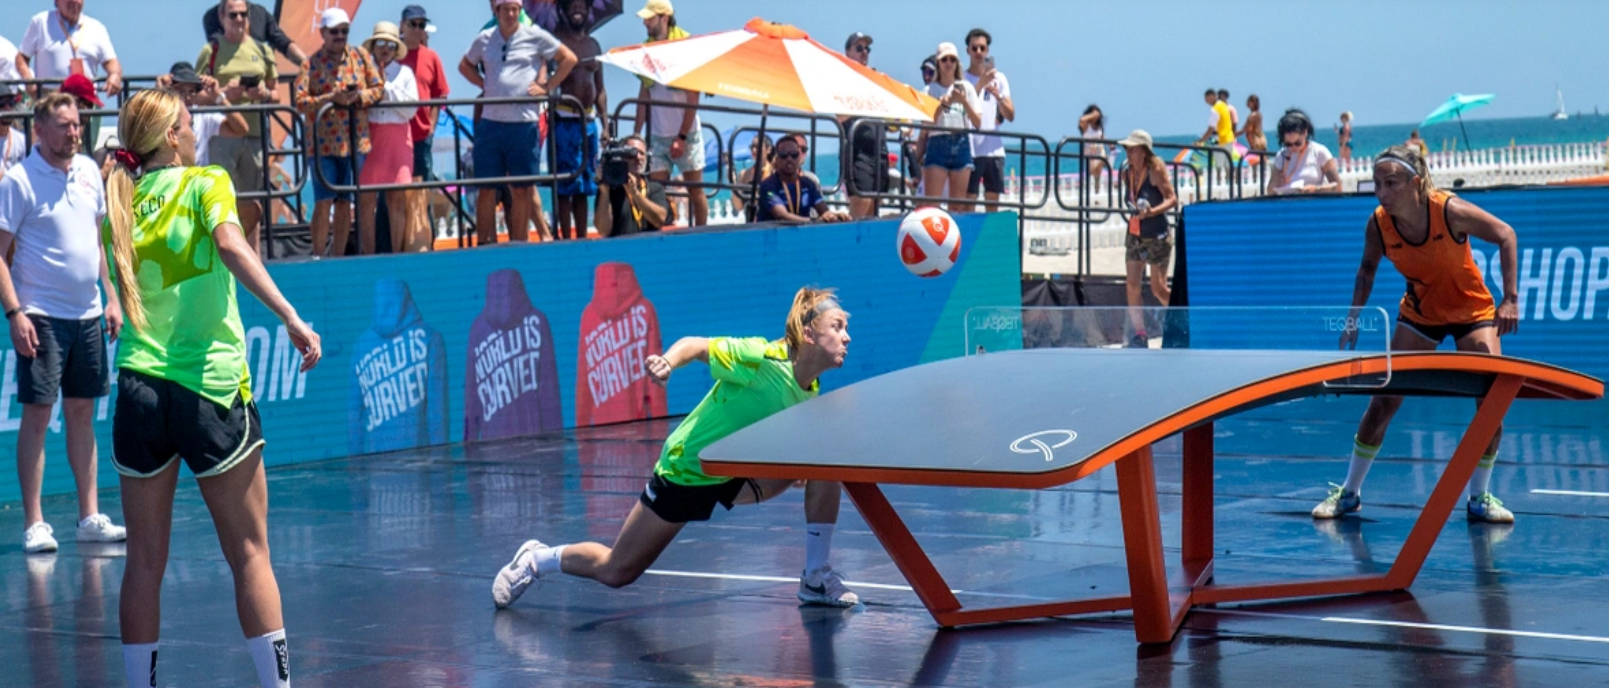 The Teqball Tour resumed its operation in the United States with a tournament on South Beach in Miami ©FITEQ